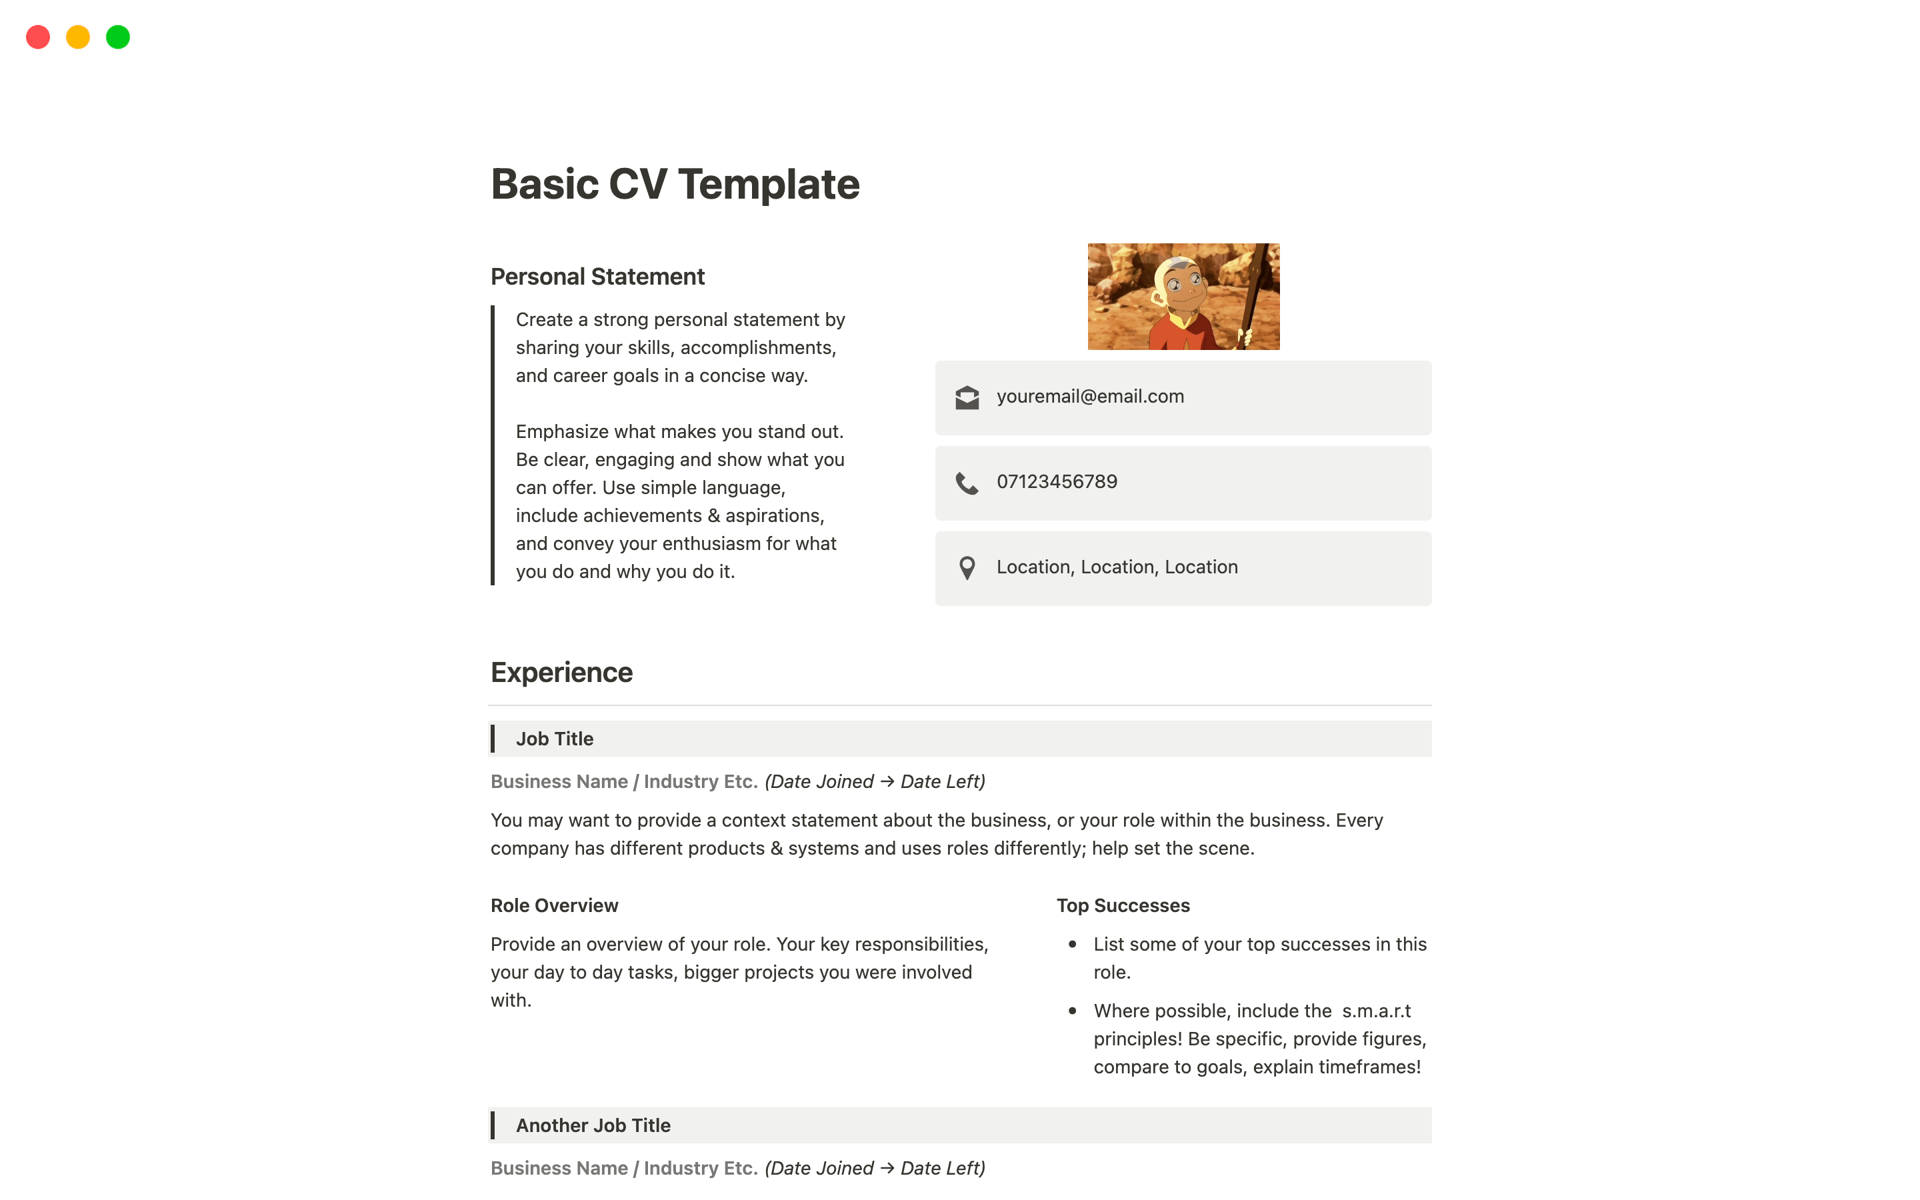 A template preview for Basic CV